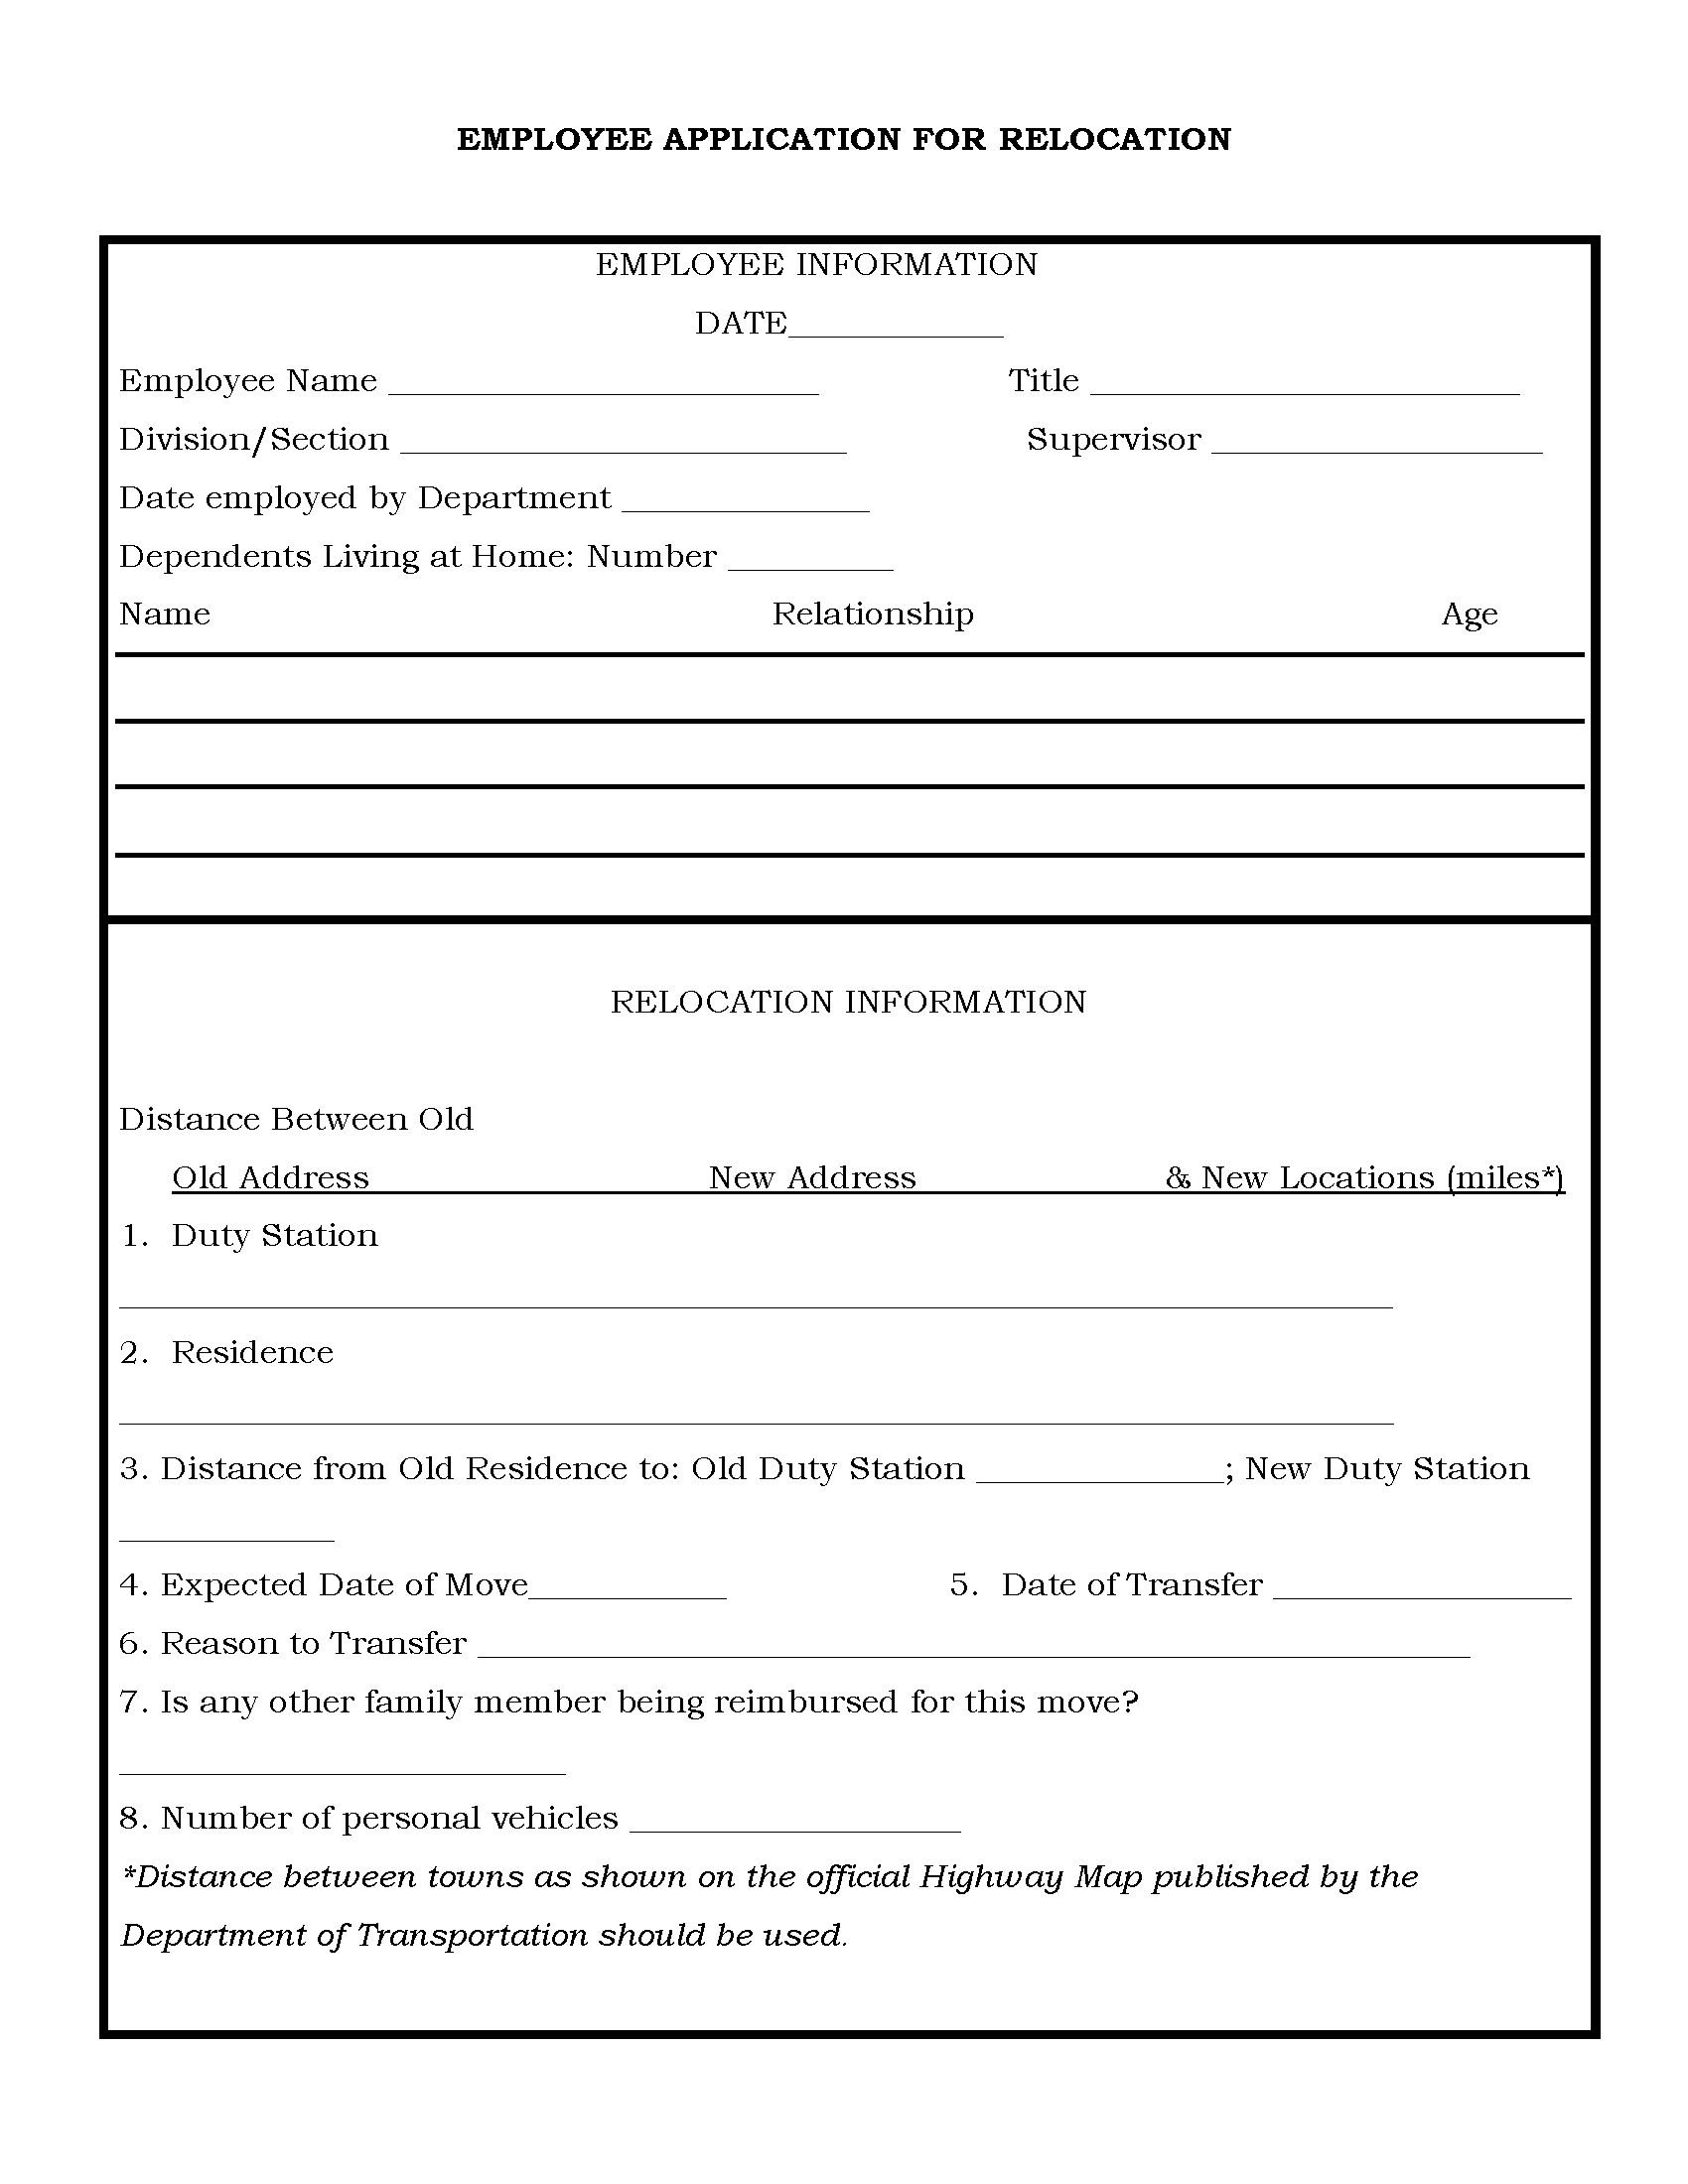 Employee Application For Relocation